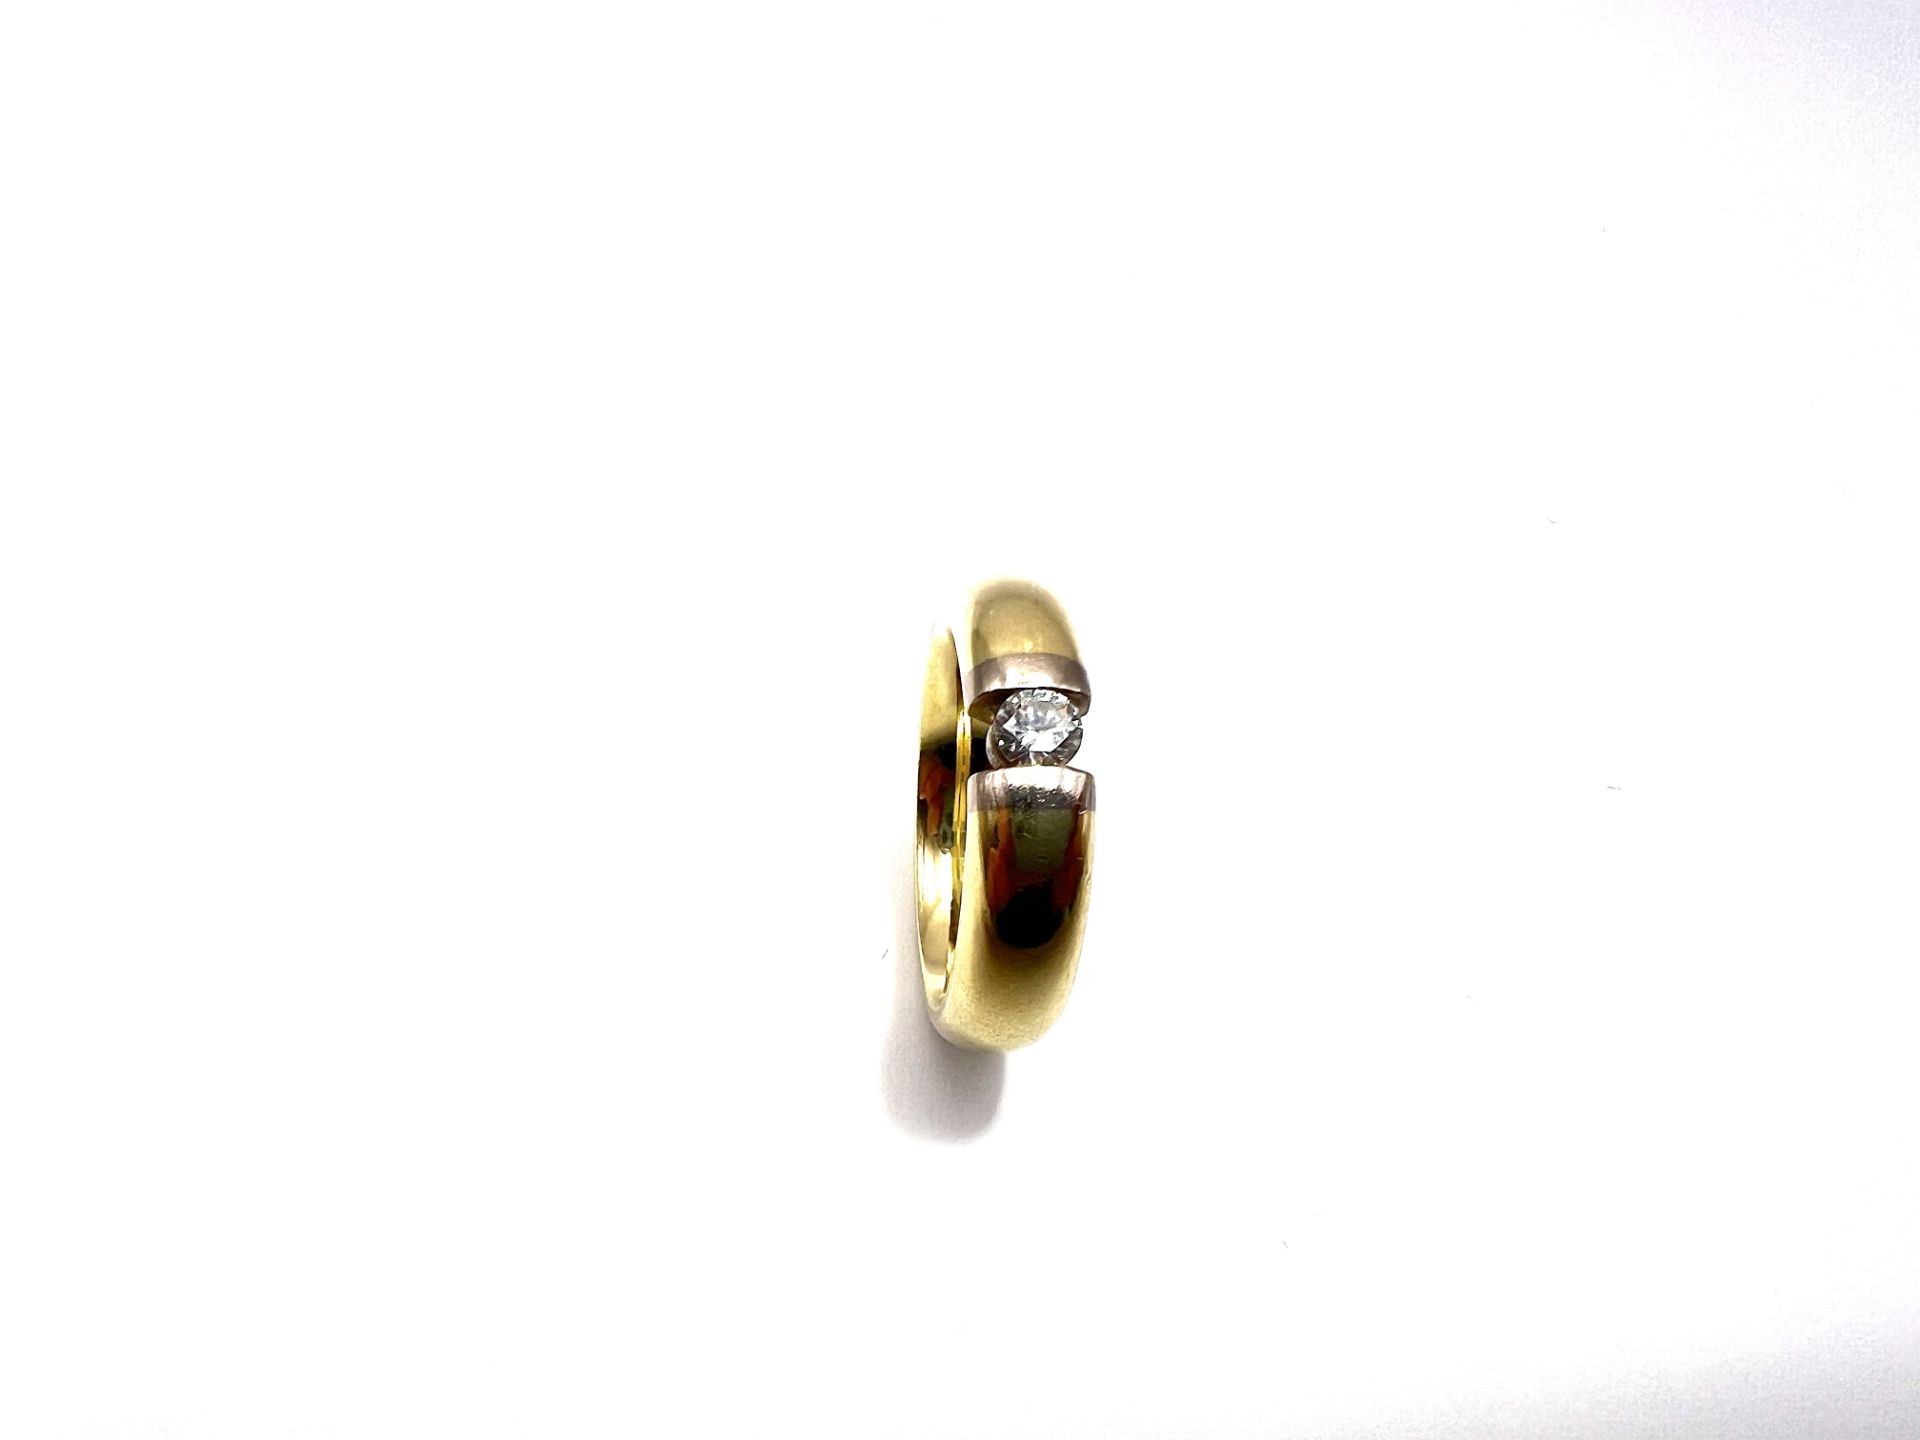 Brilliant ring in floating optic - Image 7 of 7